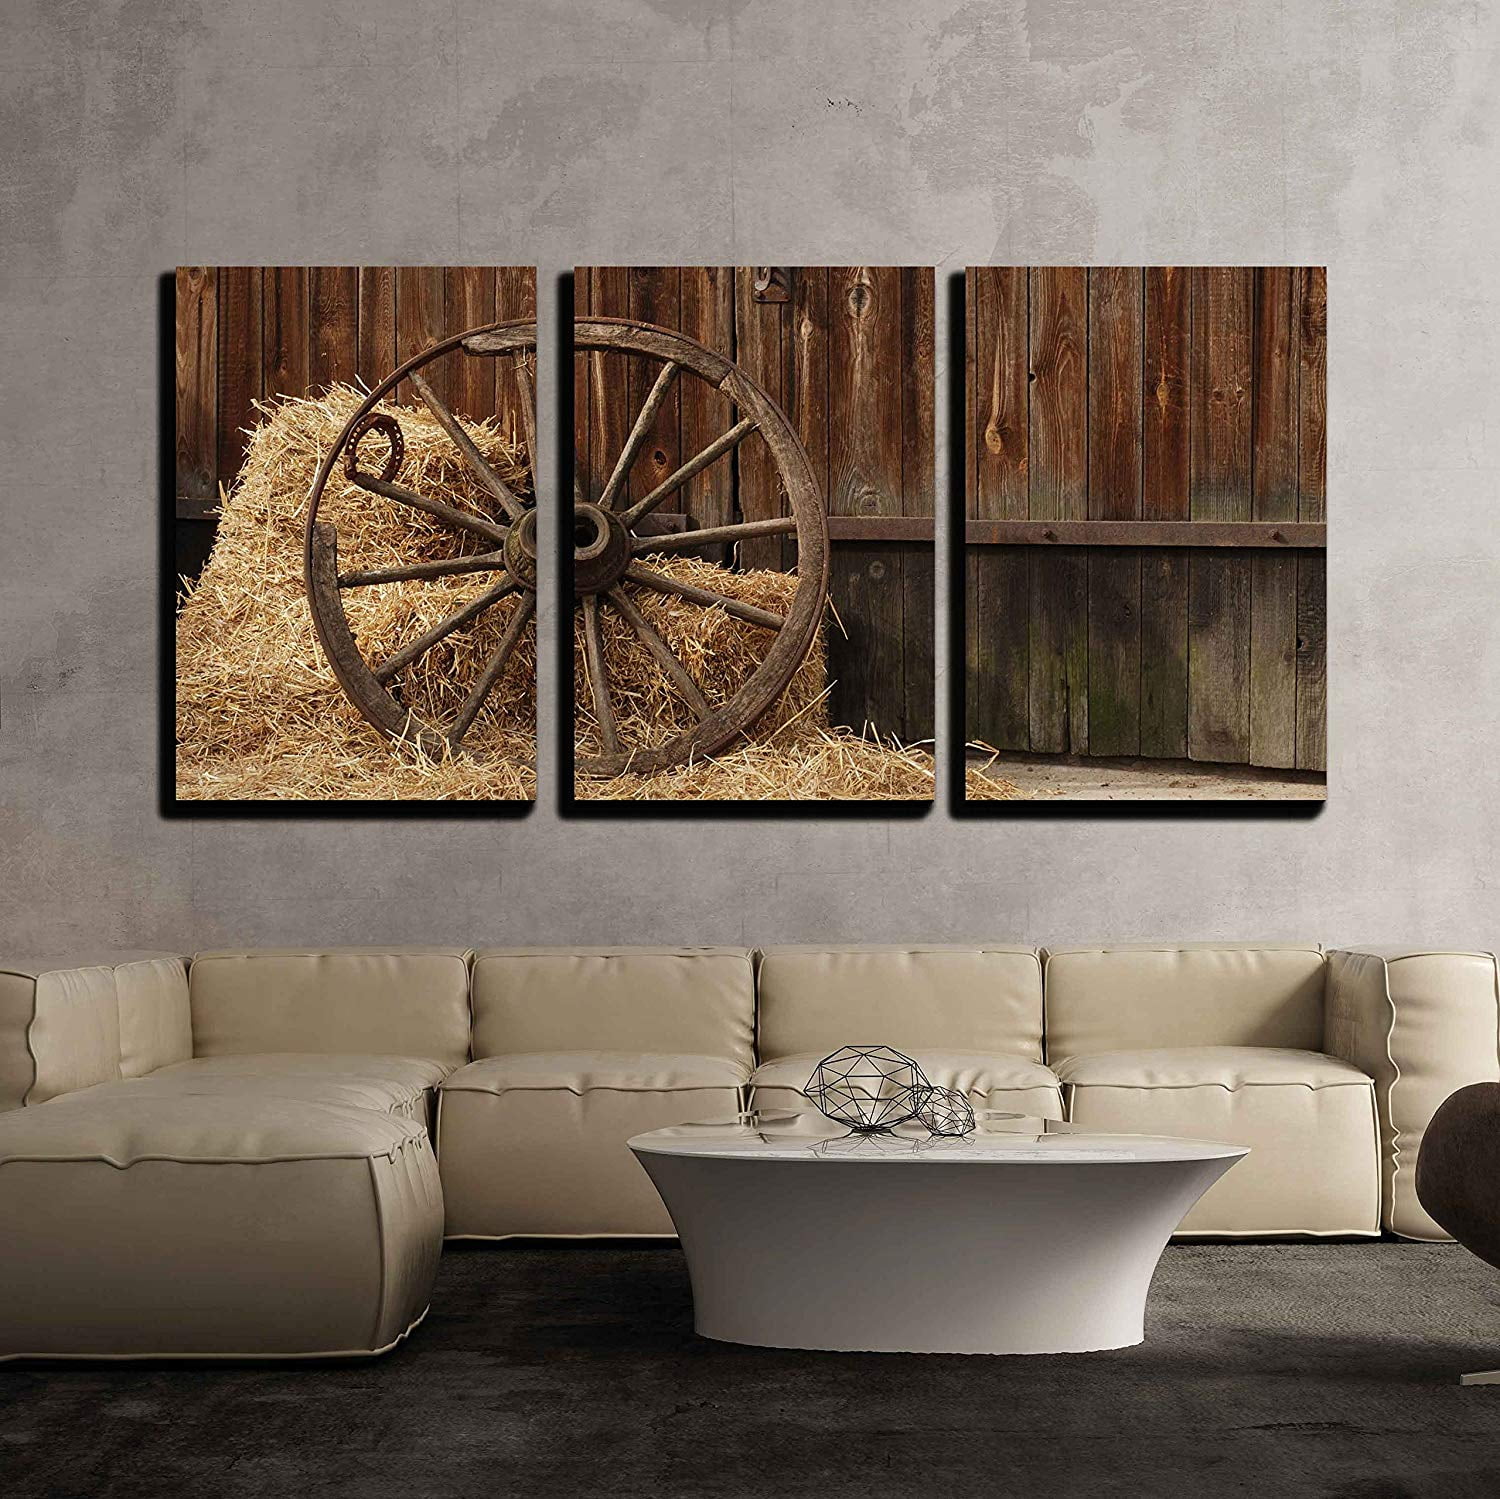 Art Print Home Decor Wall Art Poster Old Wooden Wheels Of Cart On Barn Wall 